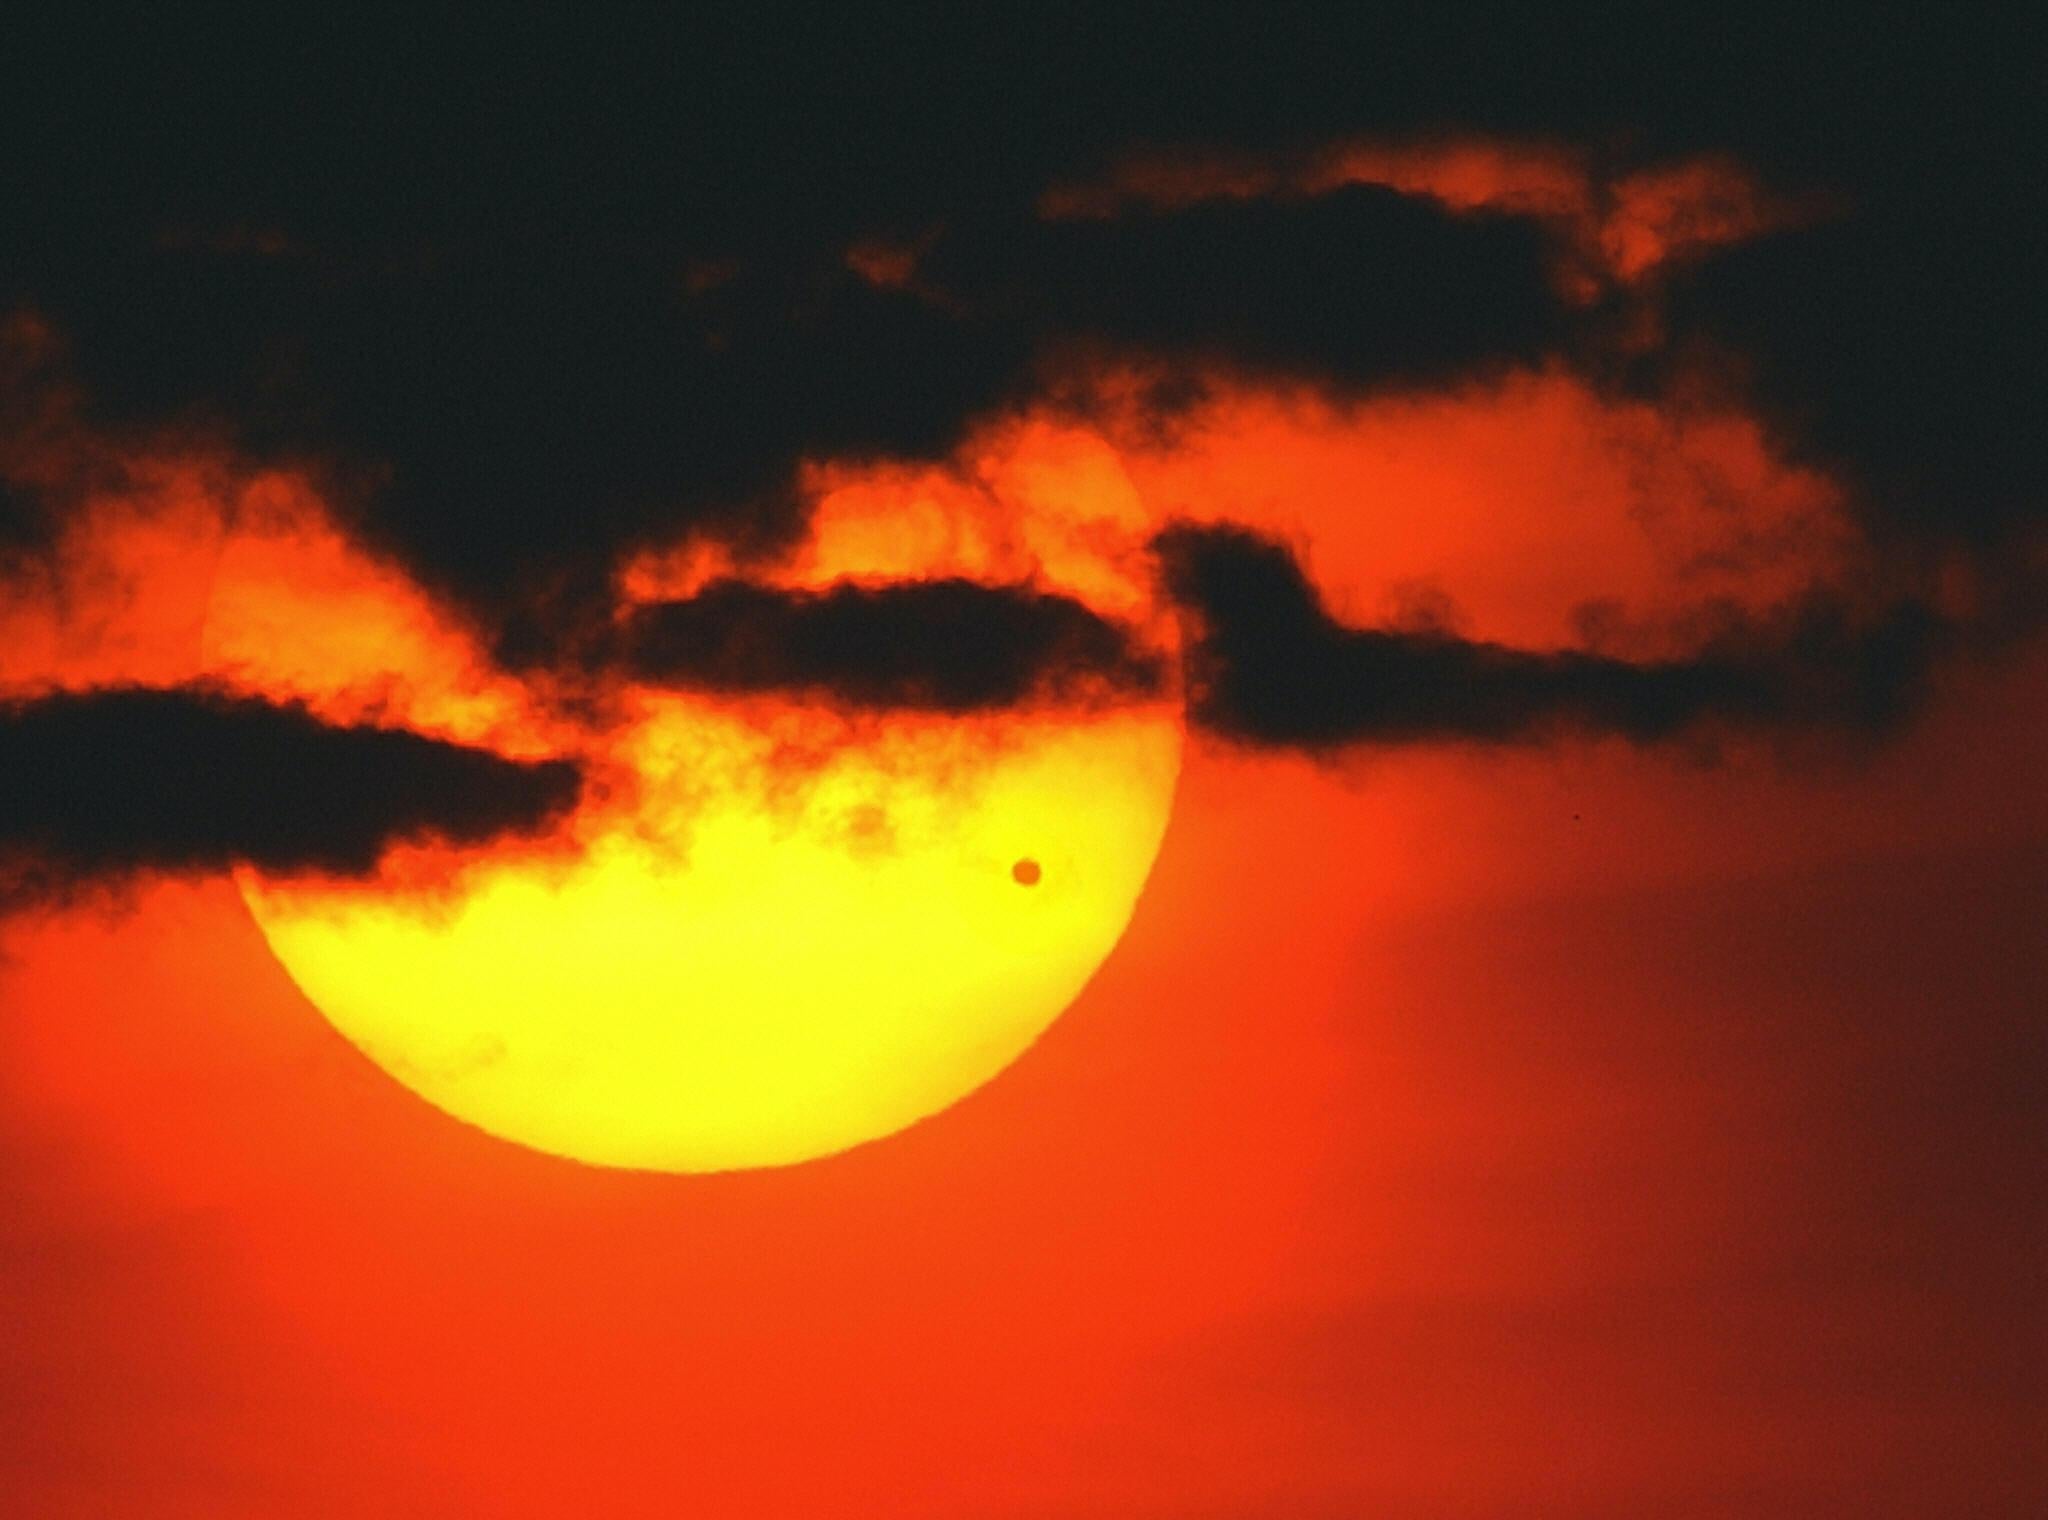 The sun rises through a bank of clouds over the East River of Manhattan as the planet Venus (dot on lower right of sun) crosses its face, 08 June, 2004, in New York